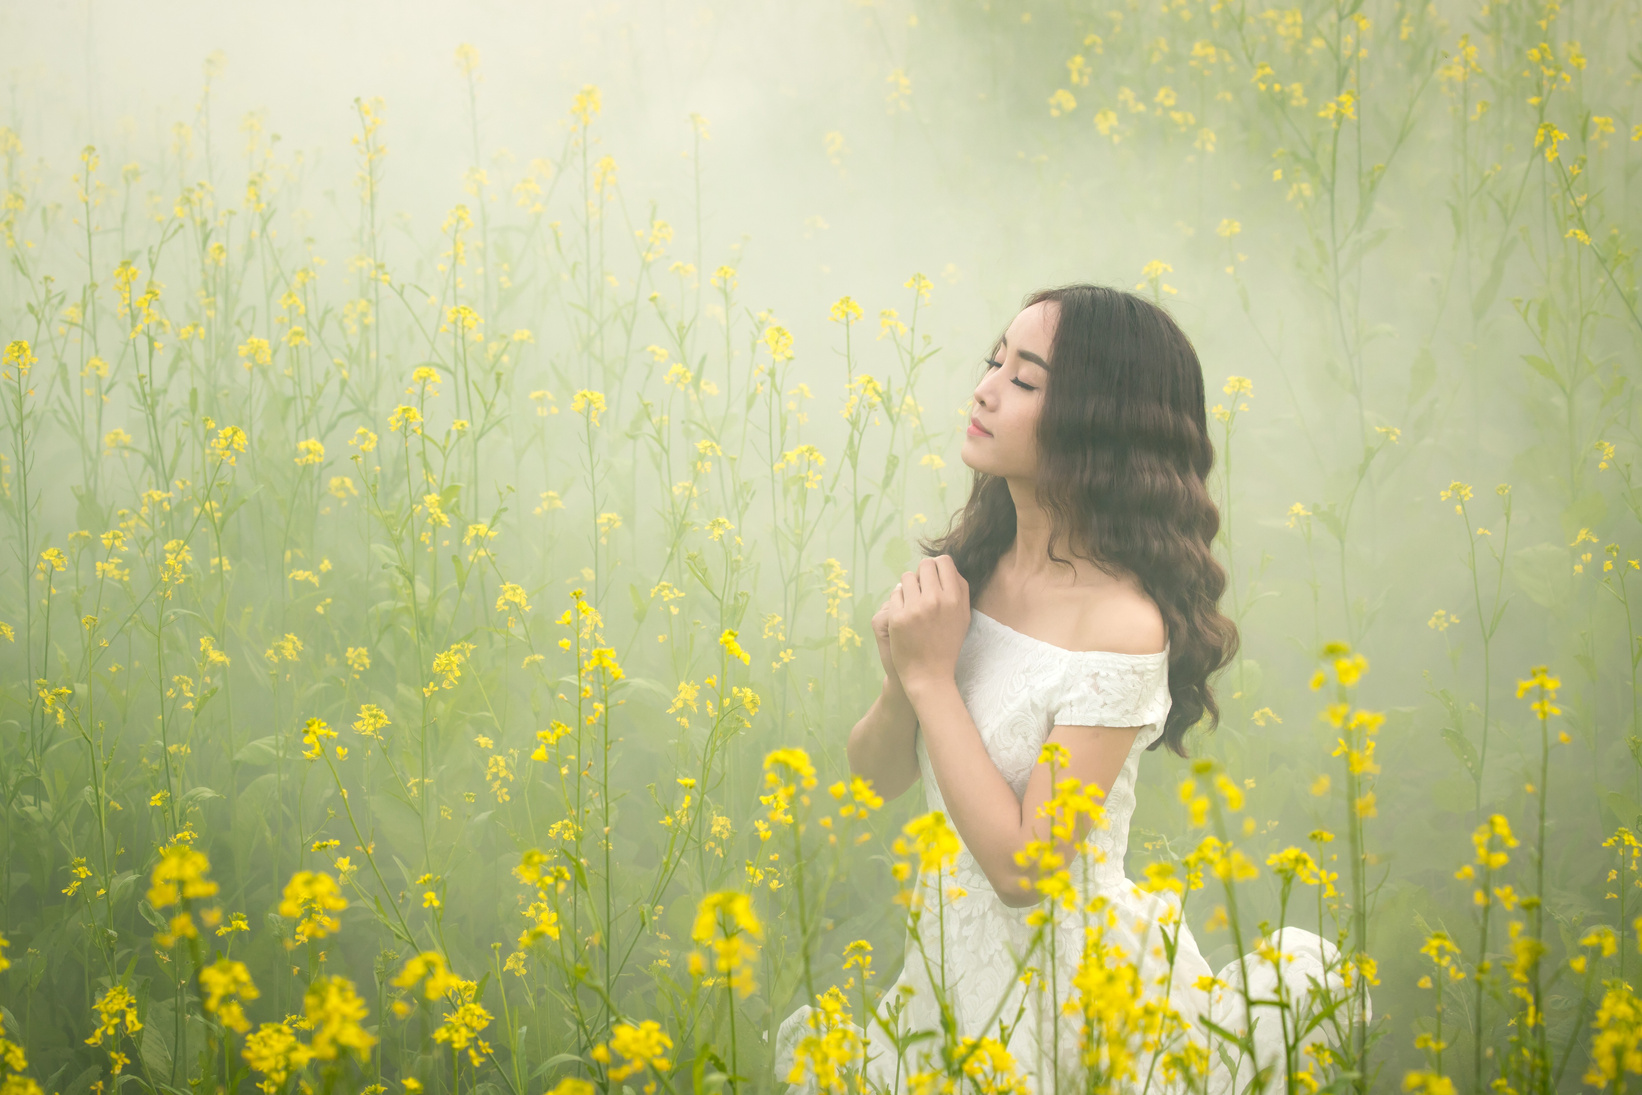 Girl in a Field of Yellow Flowers